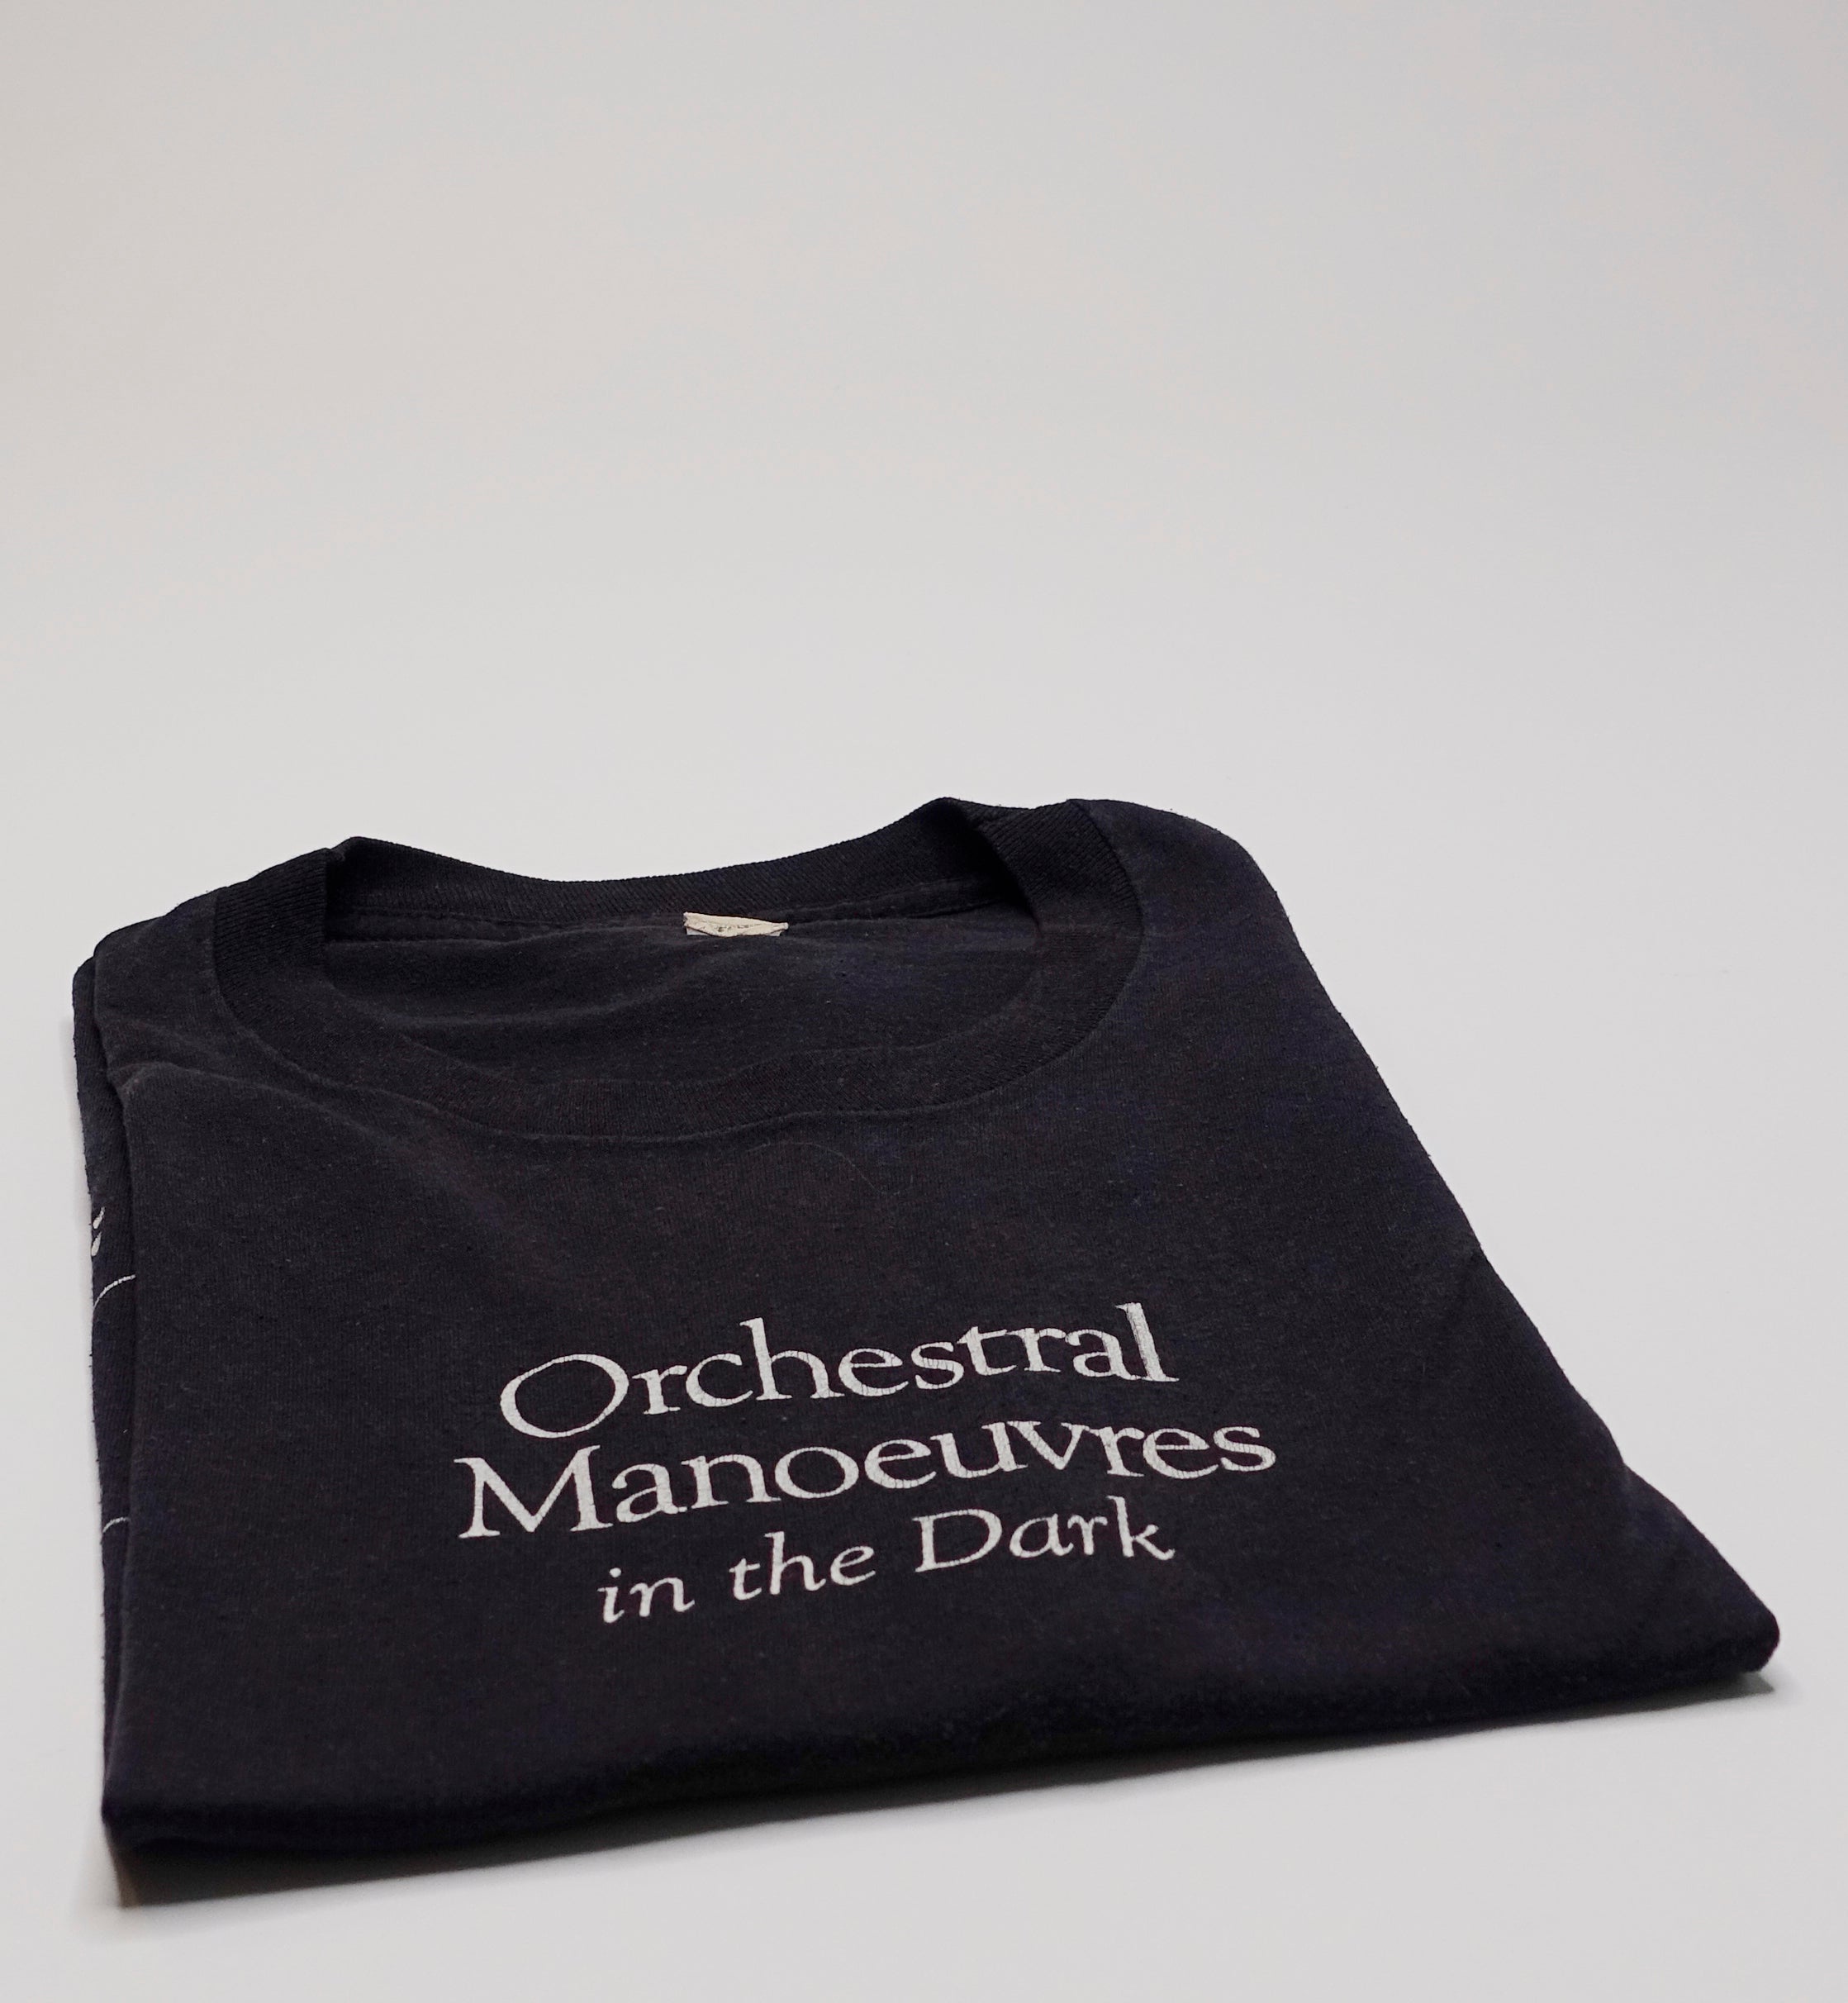 Orchestral Manoeuvres In The Dark (OMD) - Electricity Almost 80's Tour Shirt Size XL